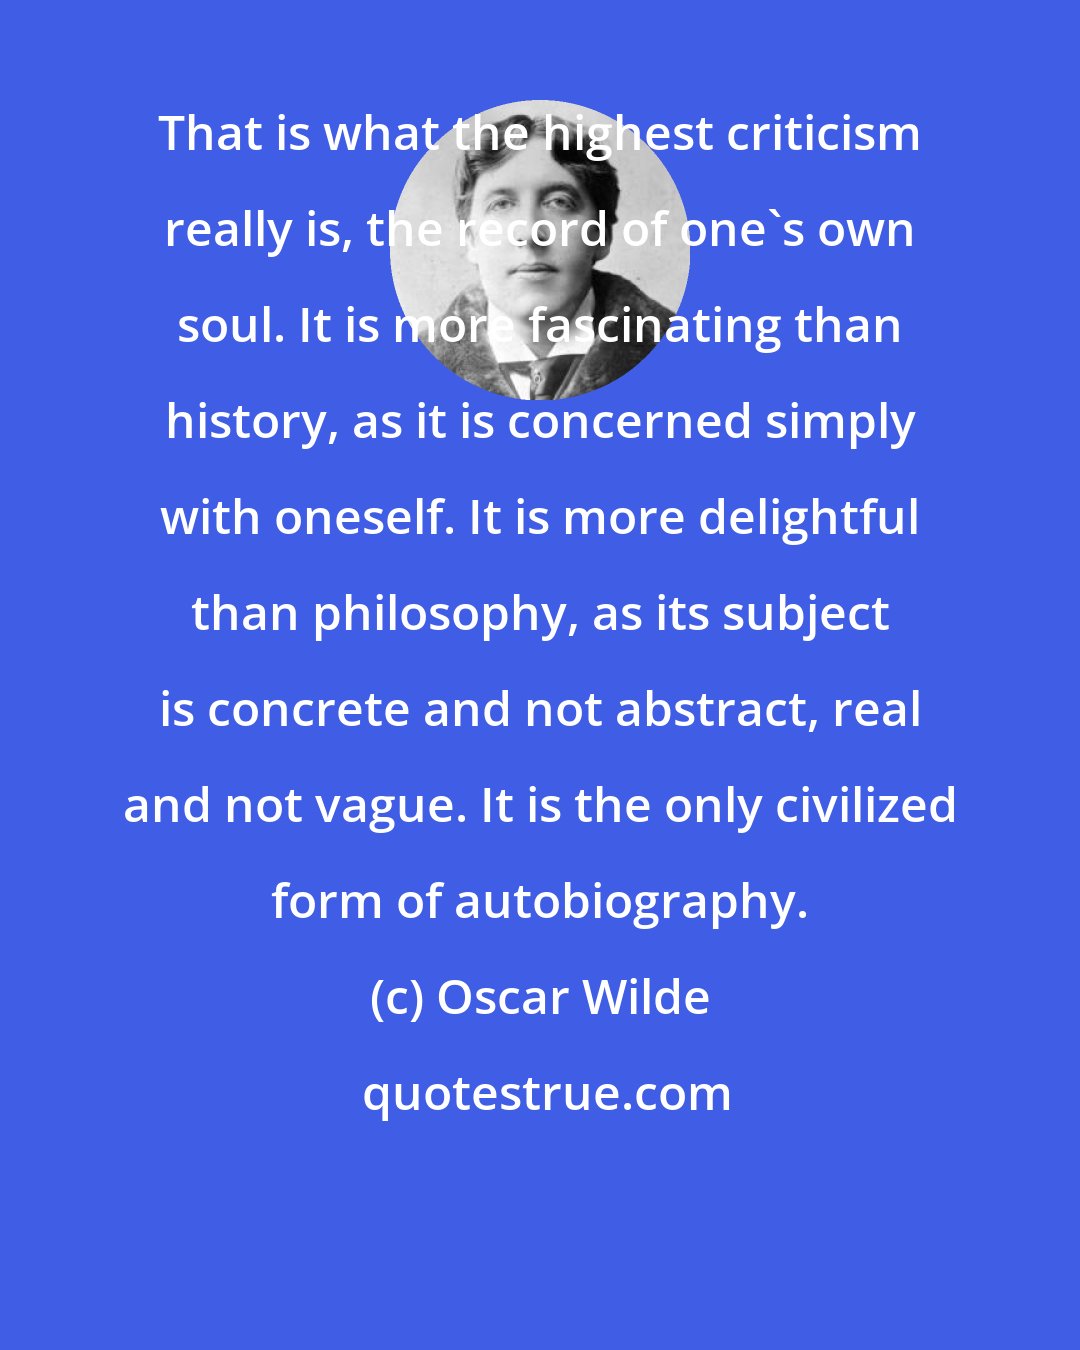 Oscar Wilde: That is what the highest criticism really is, the record of one's own soul. It is more fascinating than history, as it is concerned simply with oneself. It is more delightful than philosophy, as its subject is concrete and not abstract, real and not vague. It is the only civilized form of autobiography.